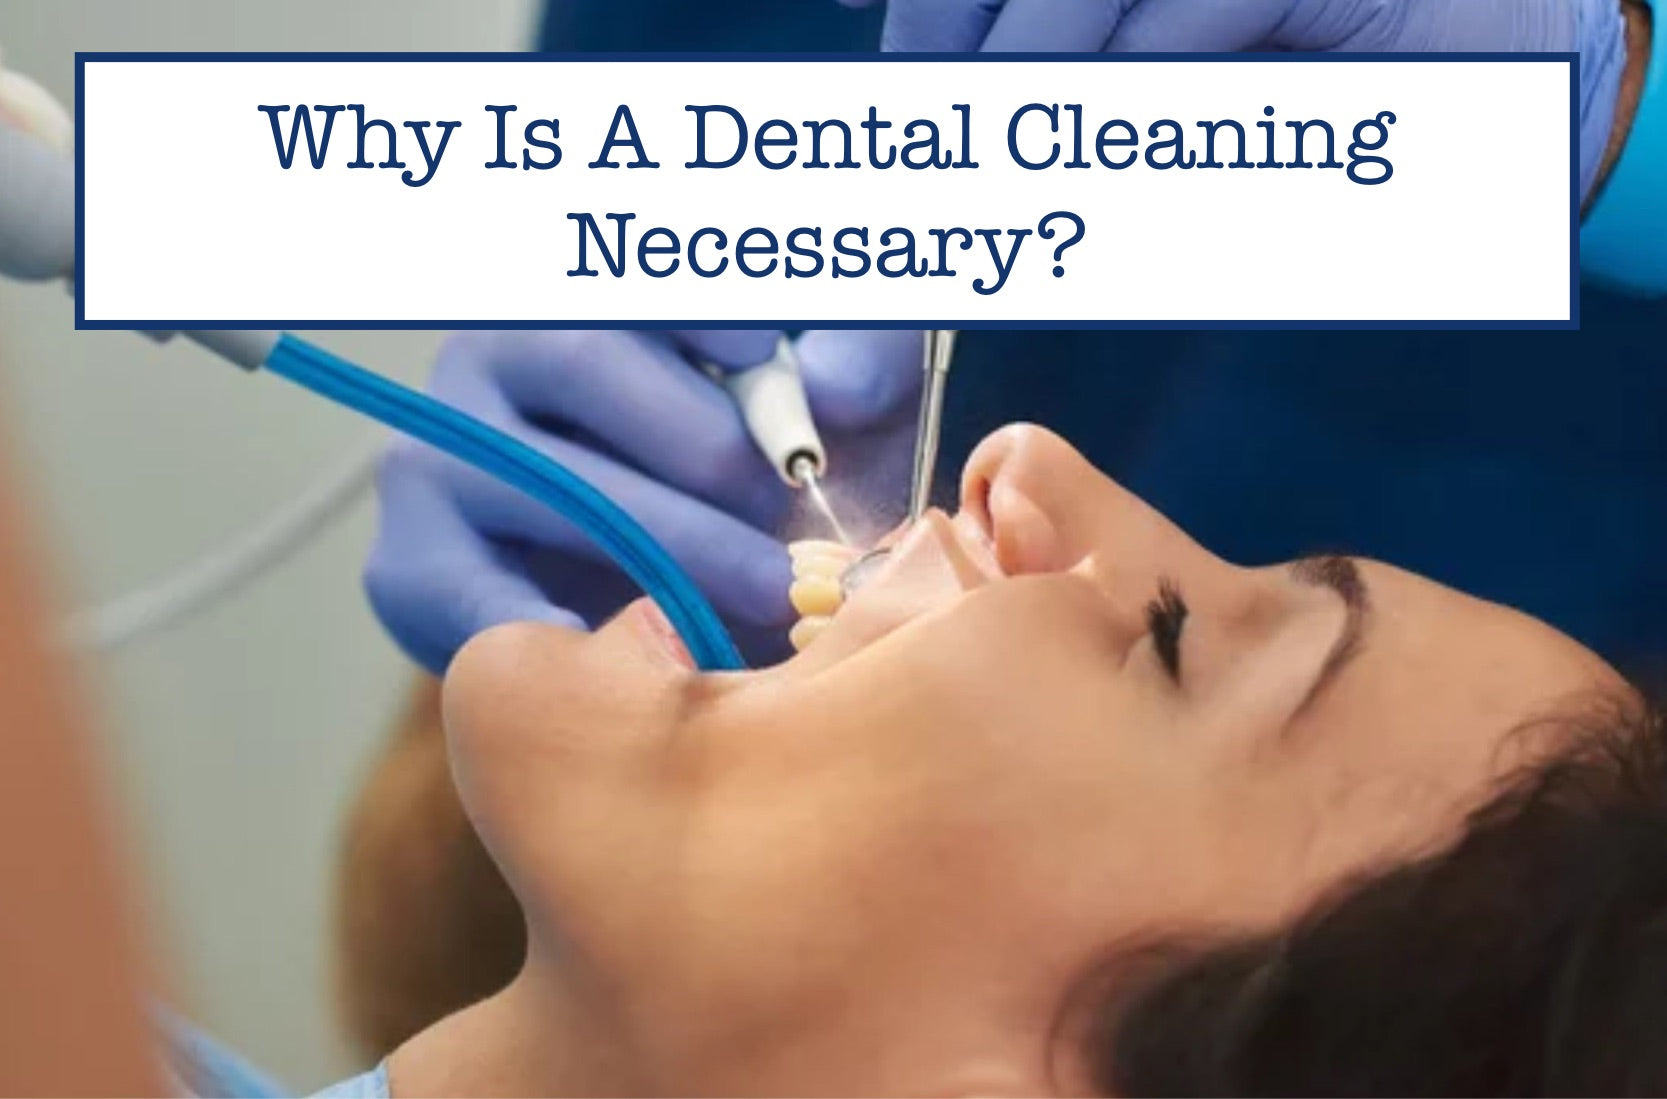 Why Is A Dental Cleaning Necessary?